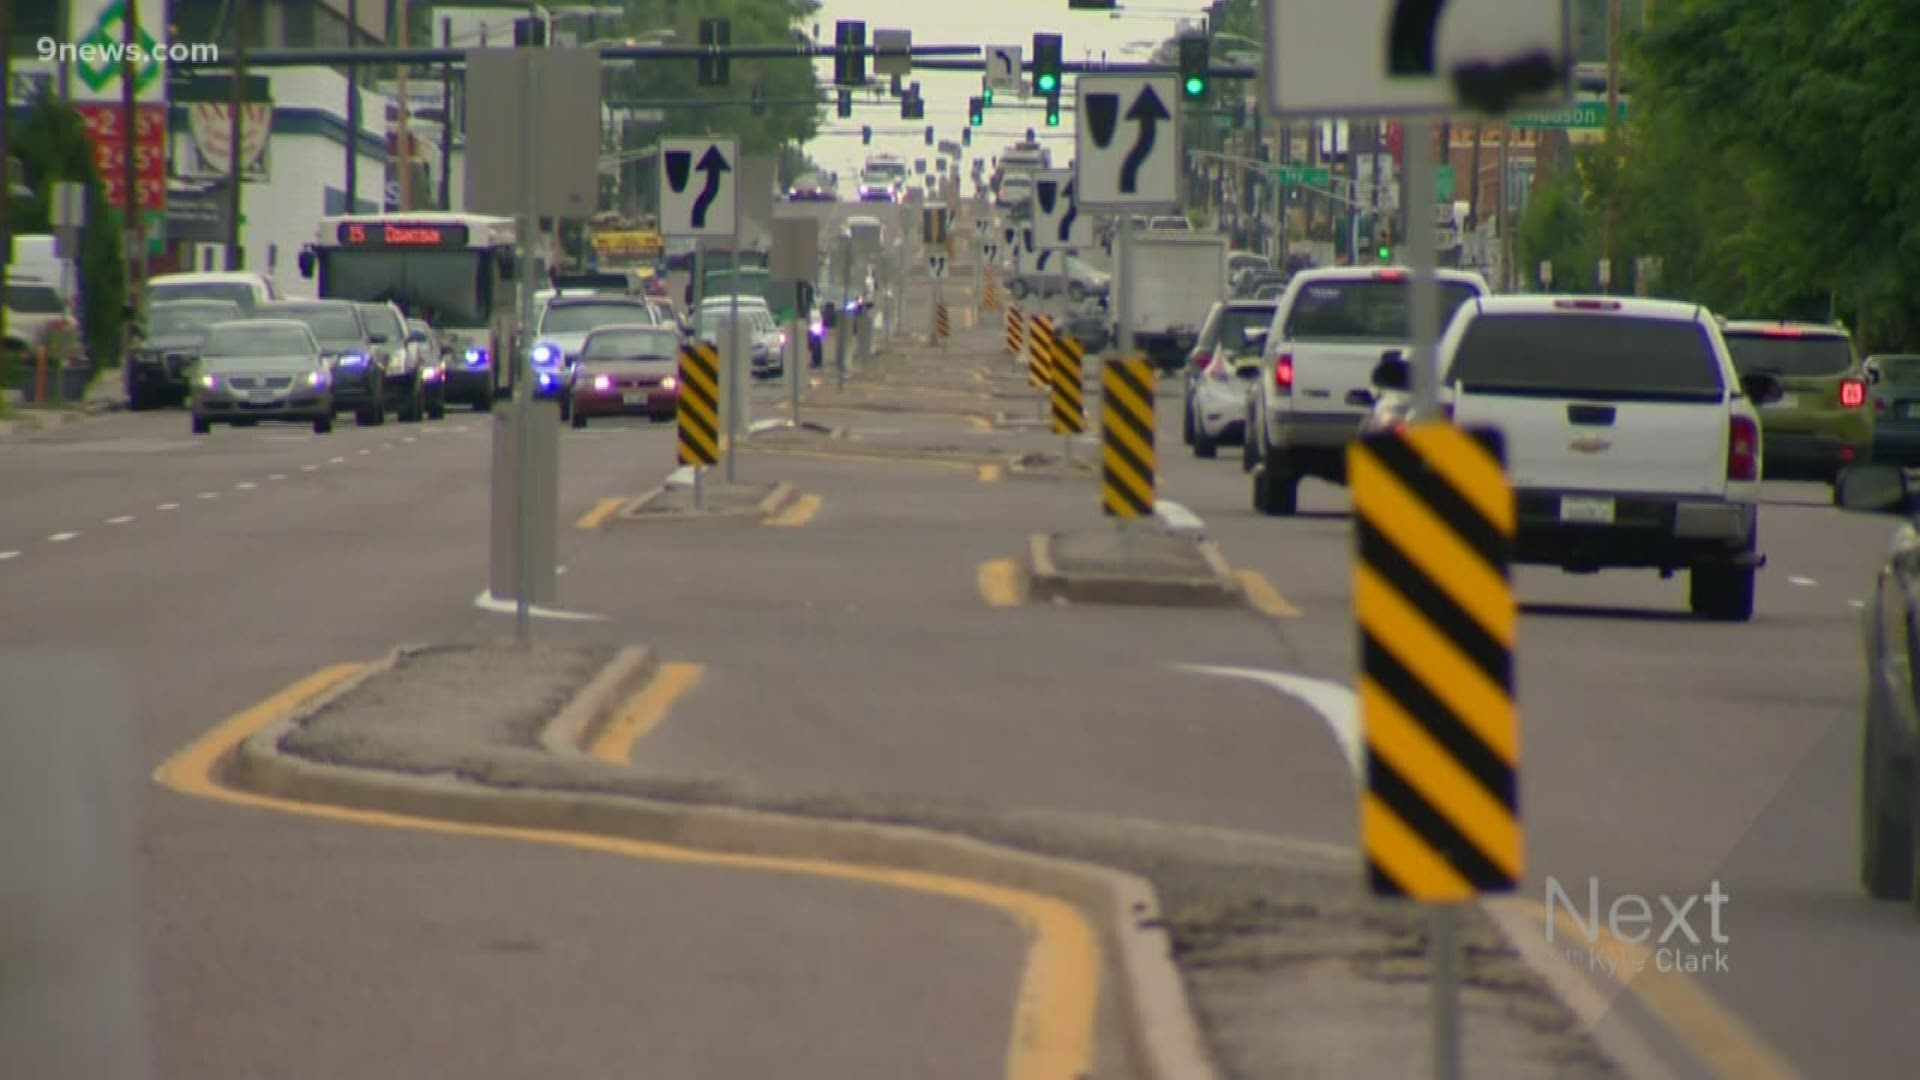 The metro area is joining Denver in chasing a traffic safety goal.